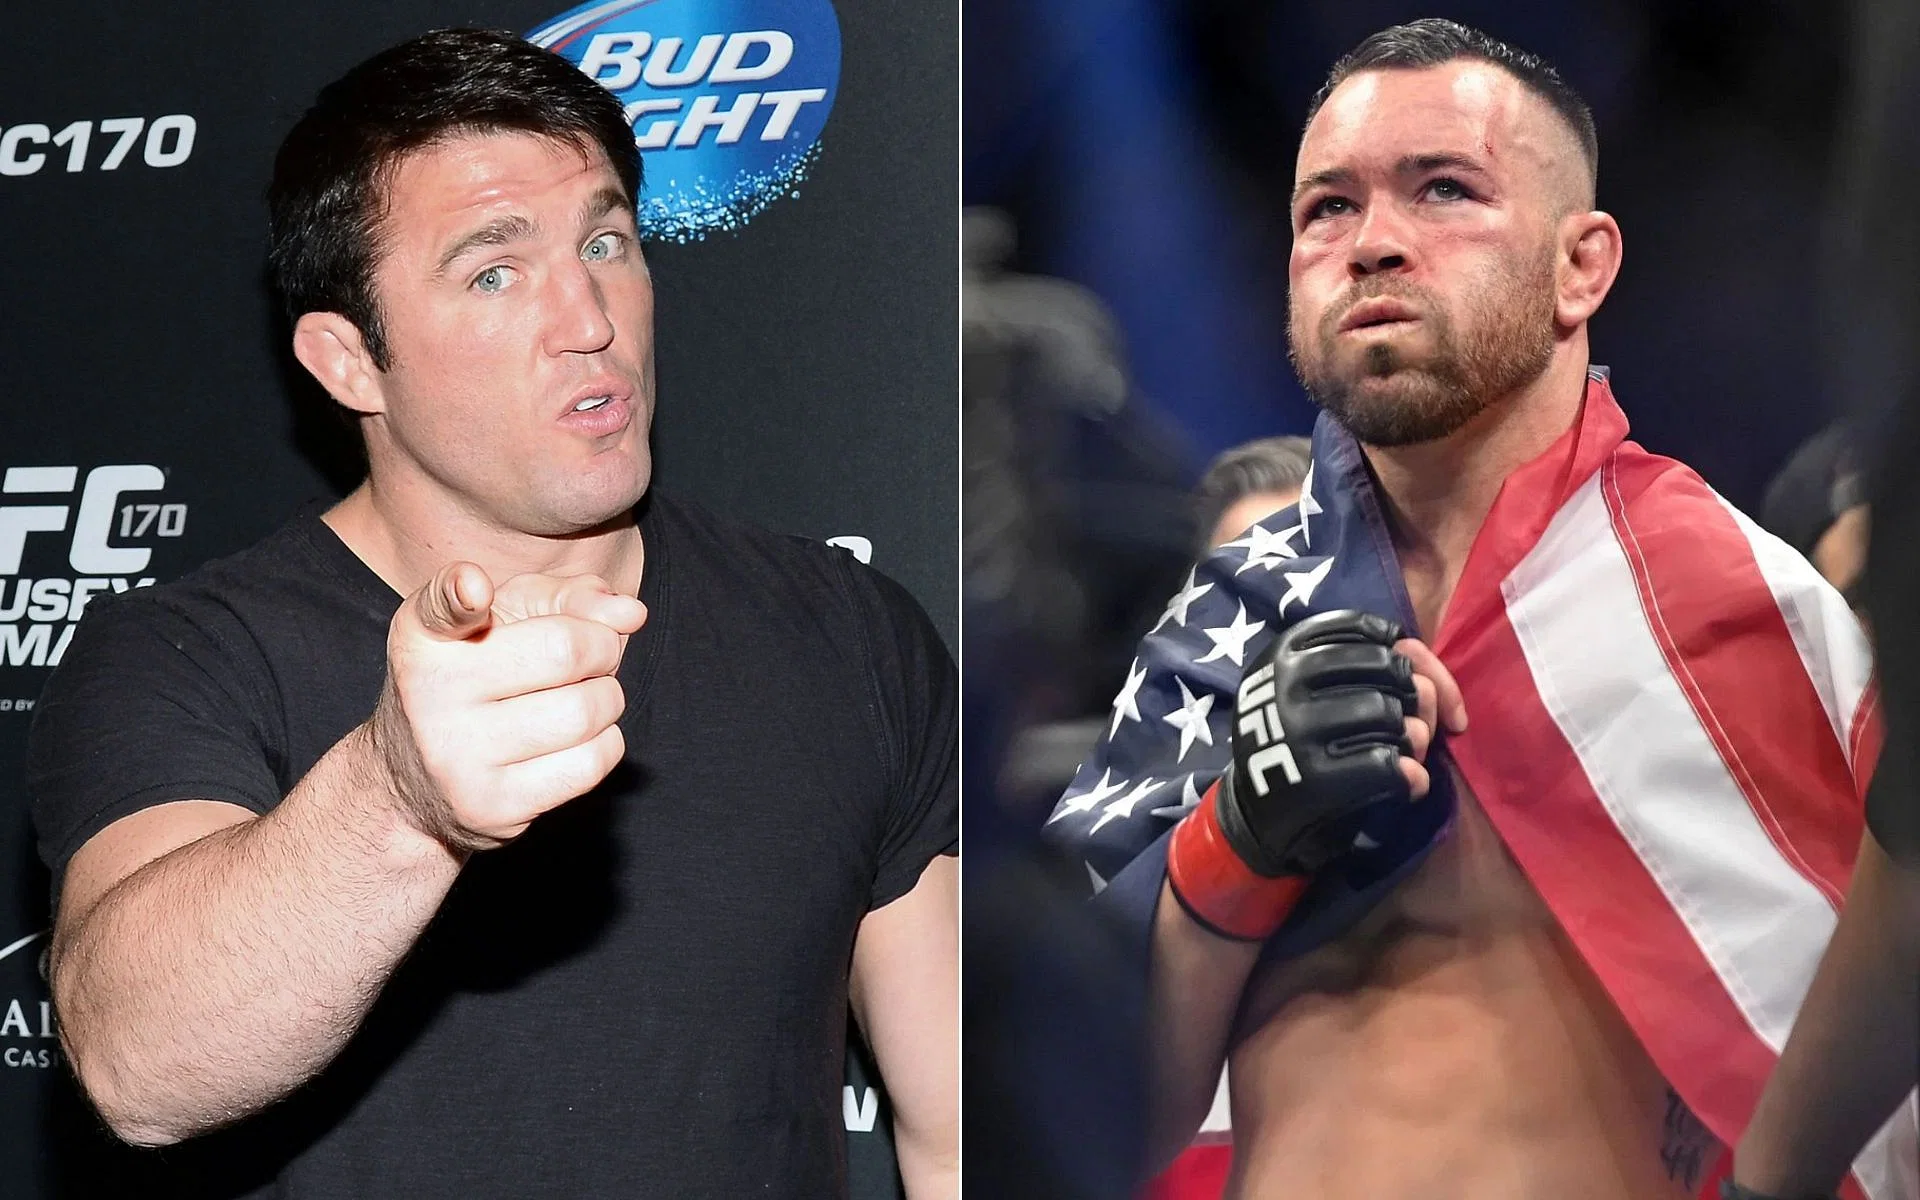 Chael Sonnen and Colby Covington